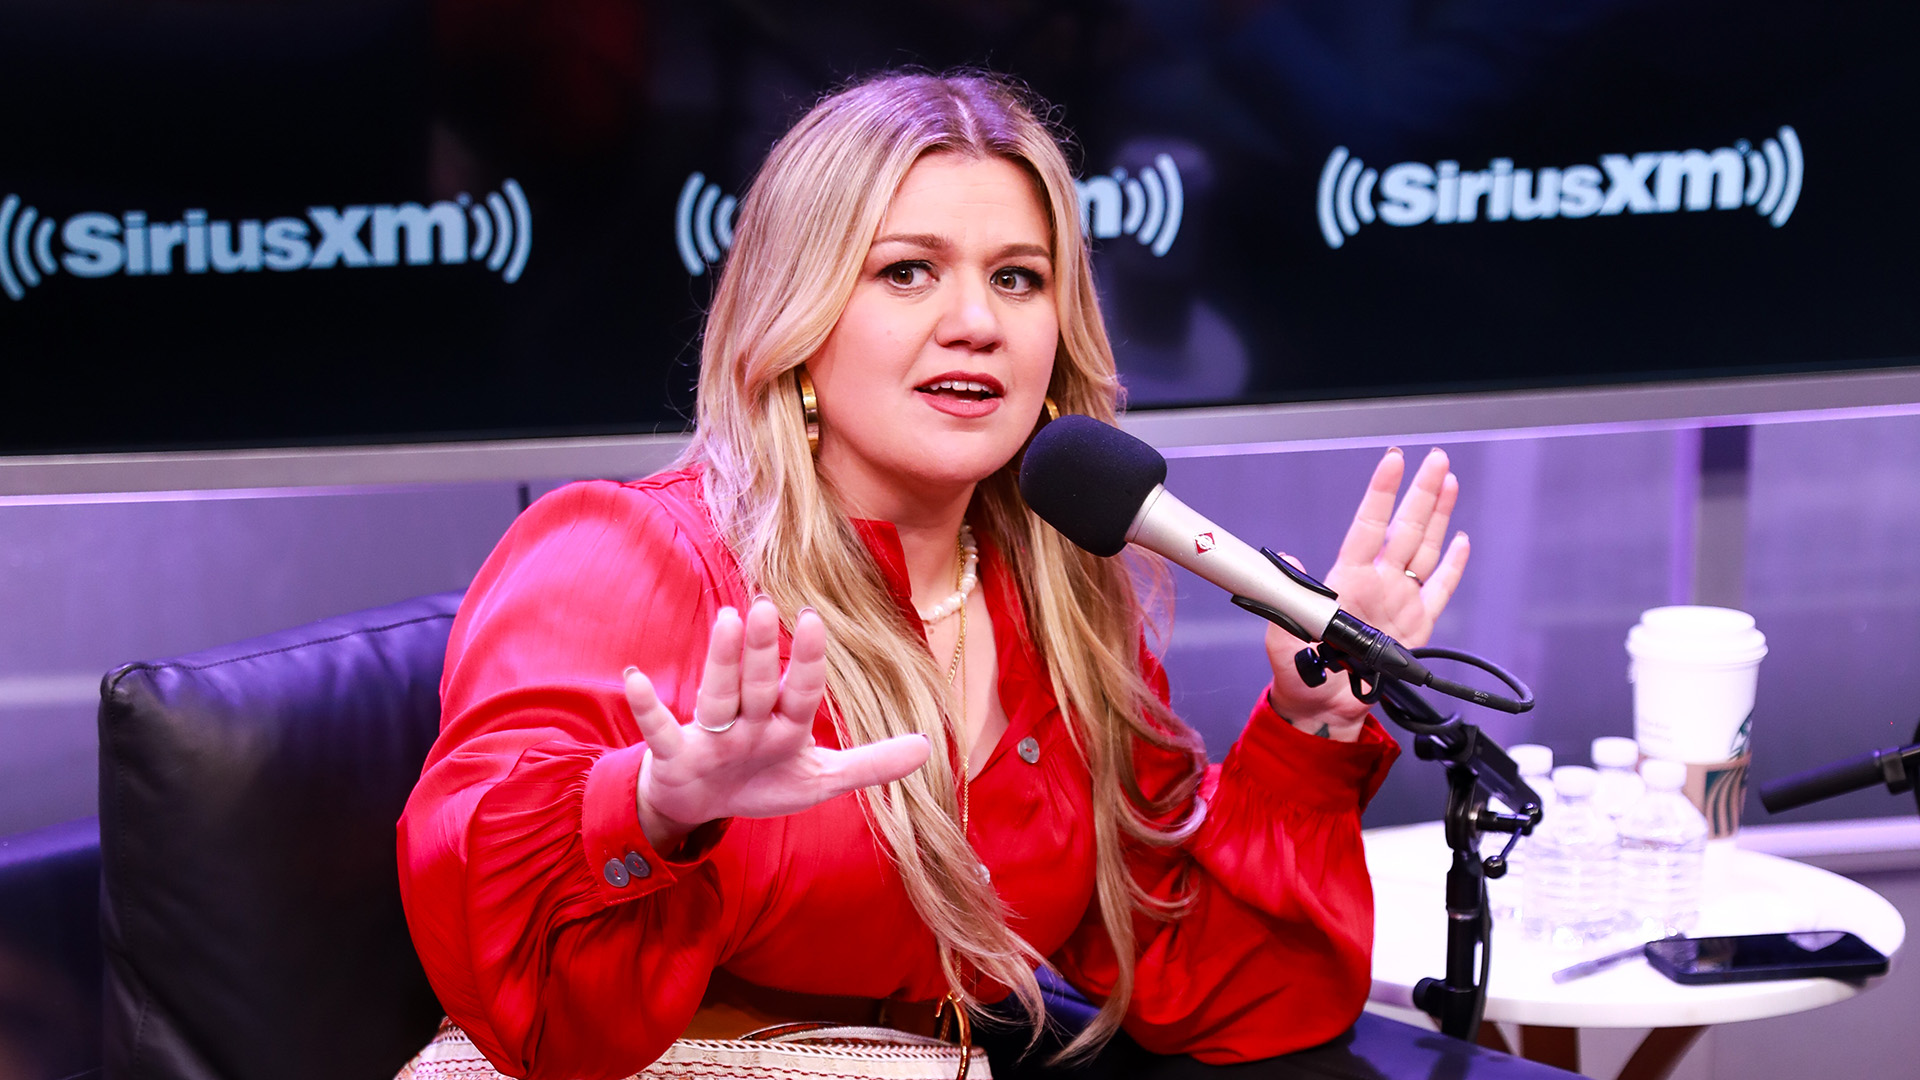 Kelly Clarkson interviewed by Andy Cohen at SiriusXM 2023